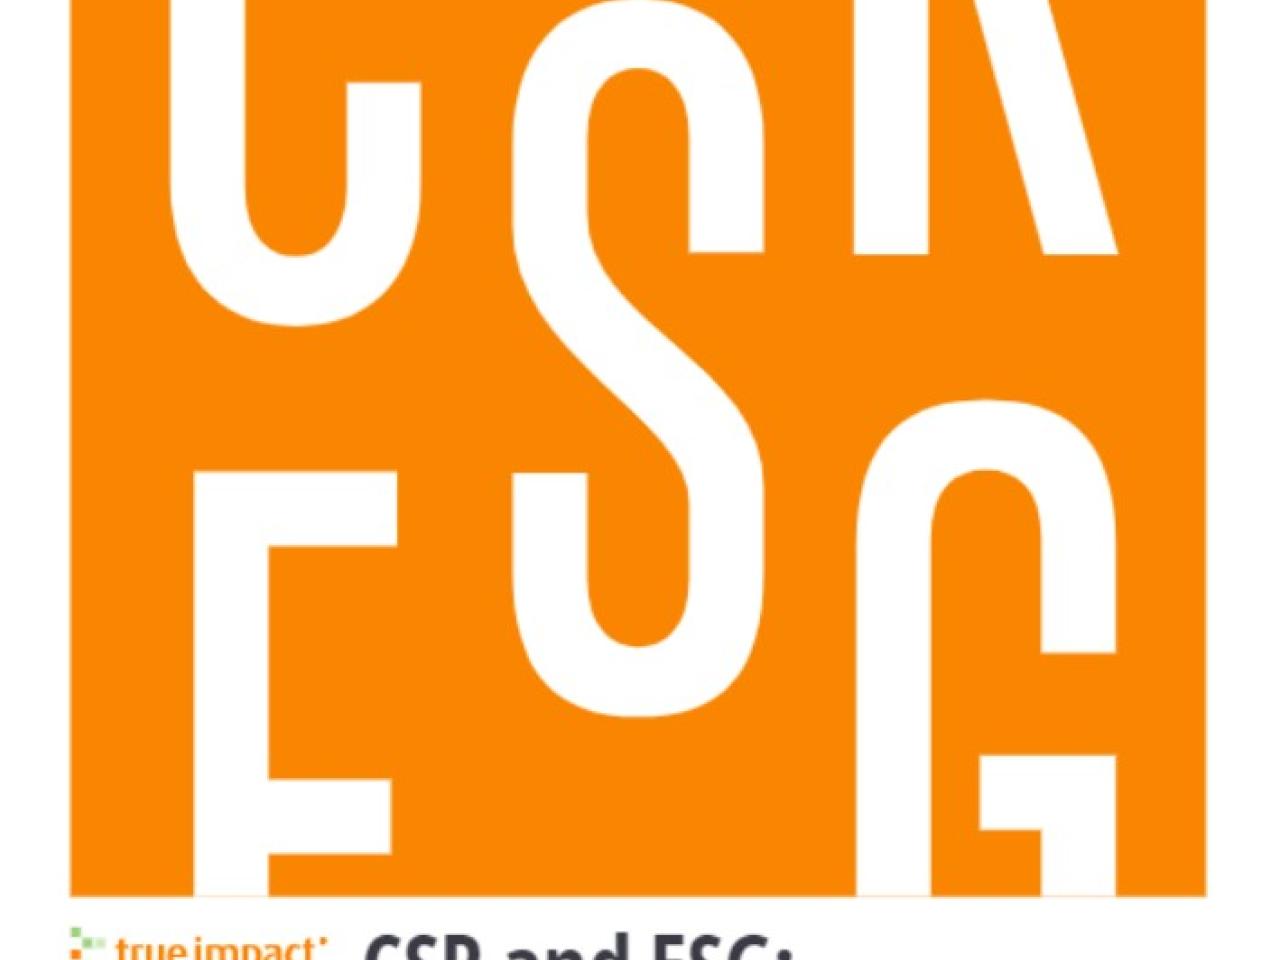 Cover of CSR and ESG: A Practical Guide to Social Impact Reporting